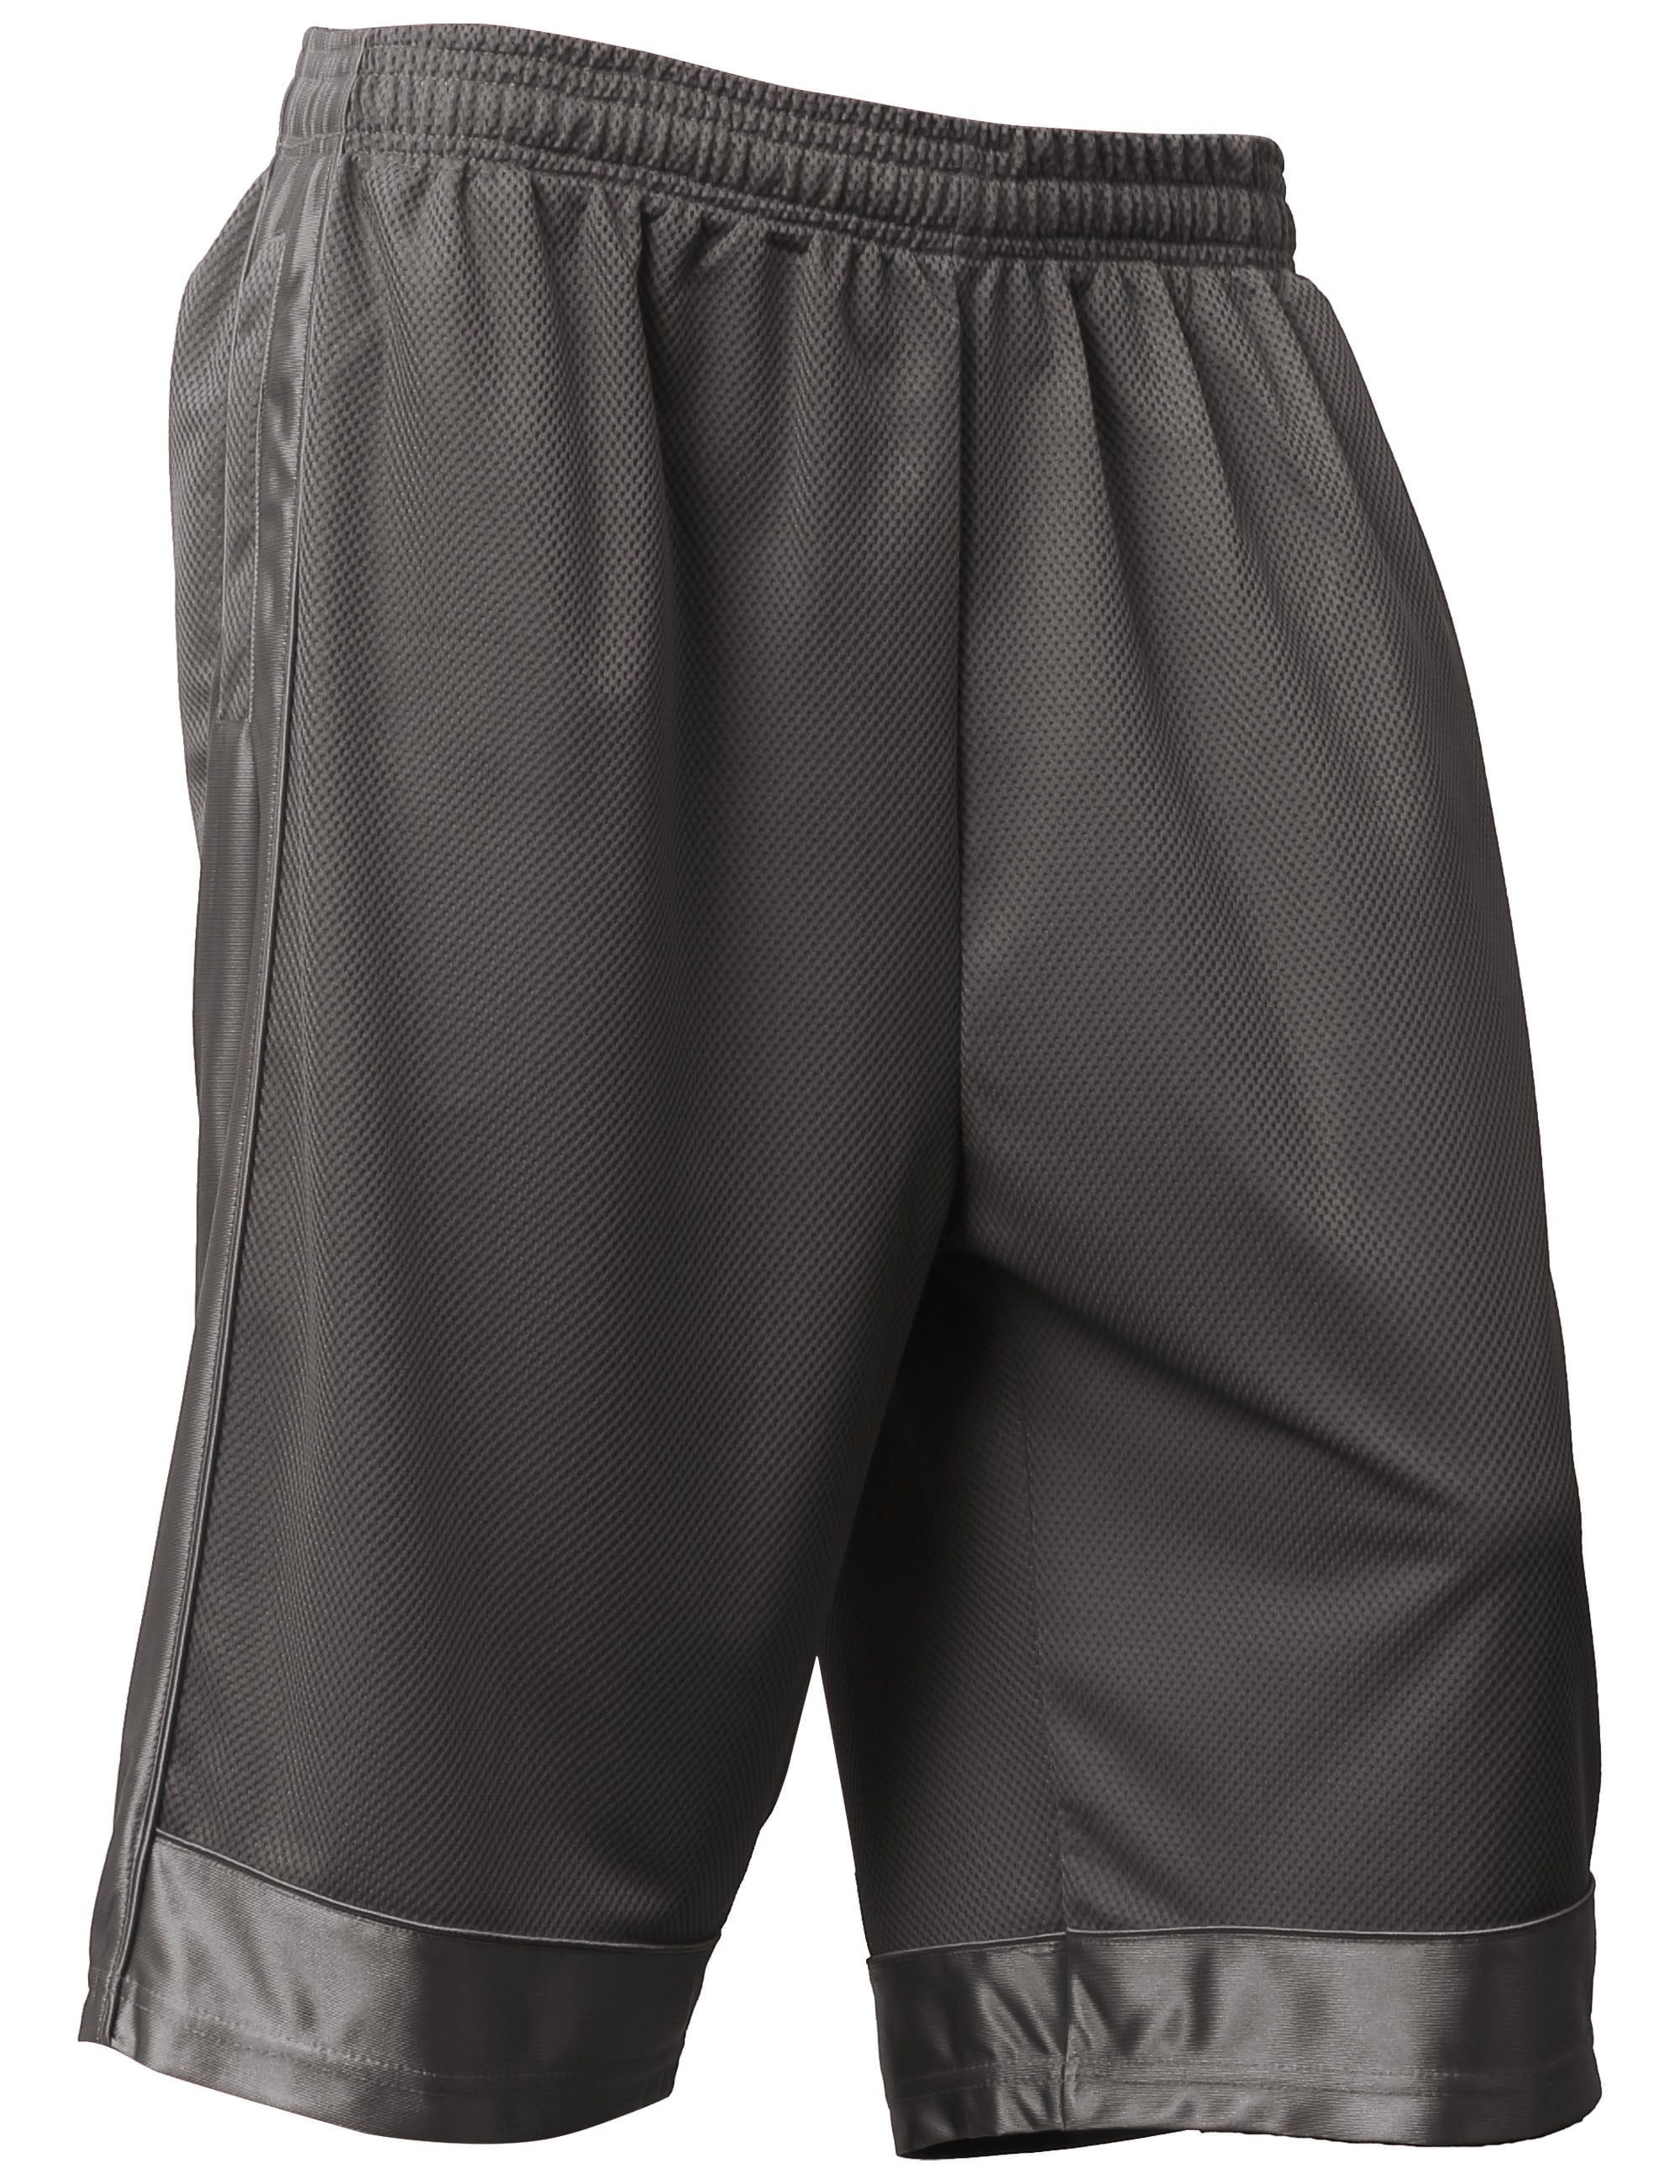 nike gym shorts with zipper pockets